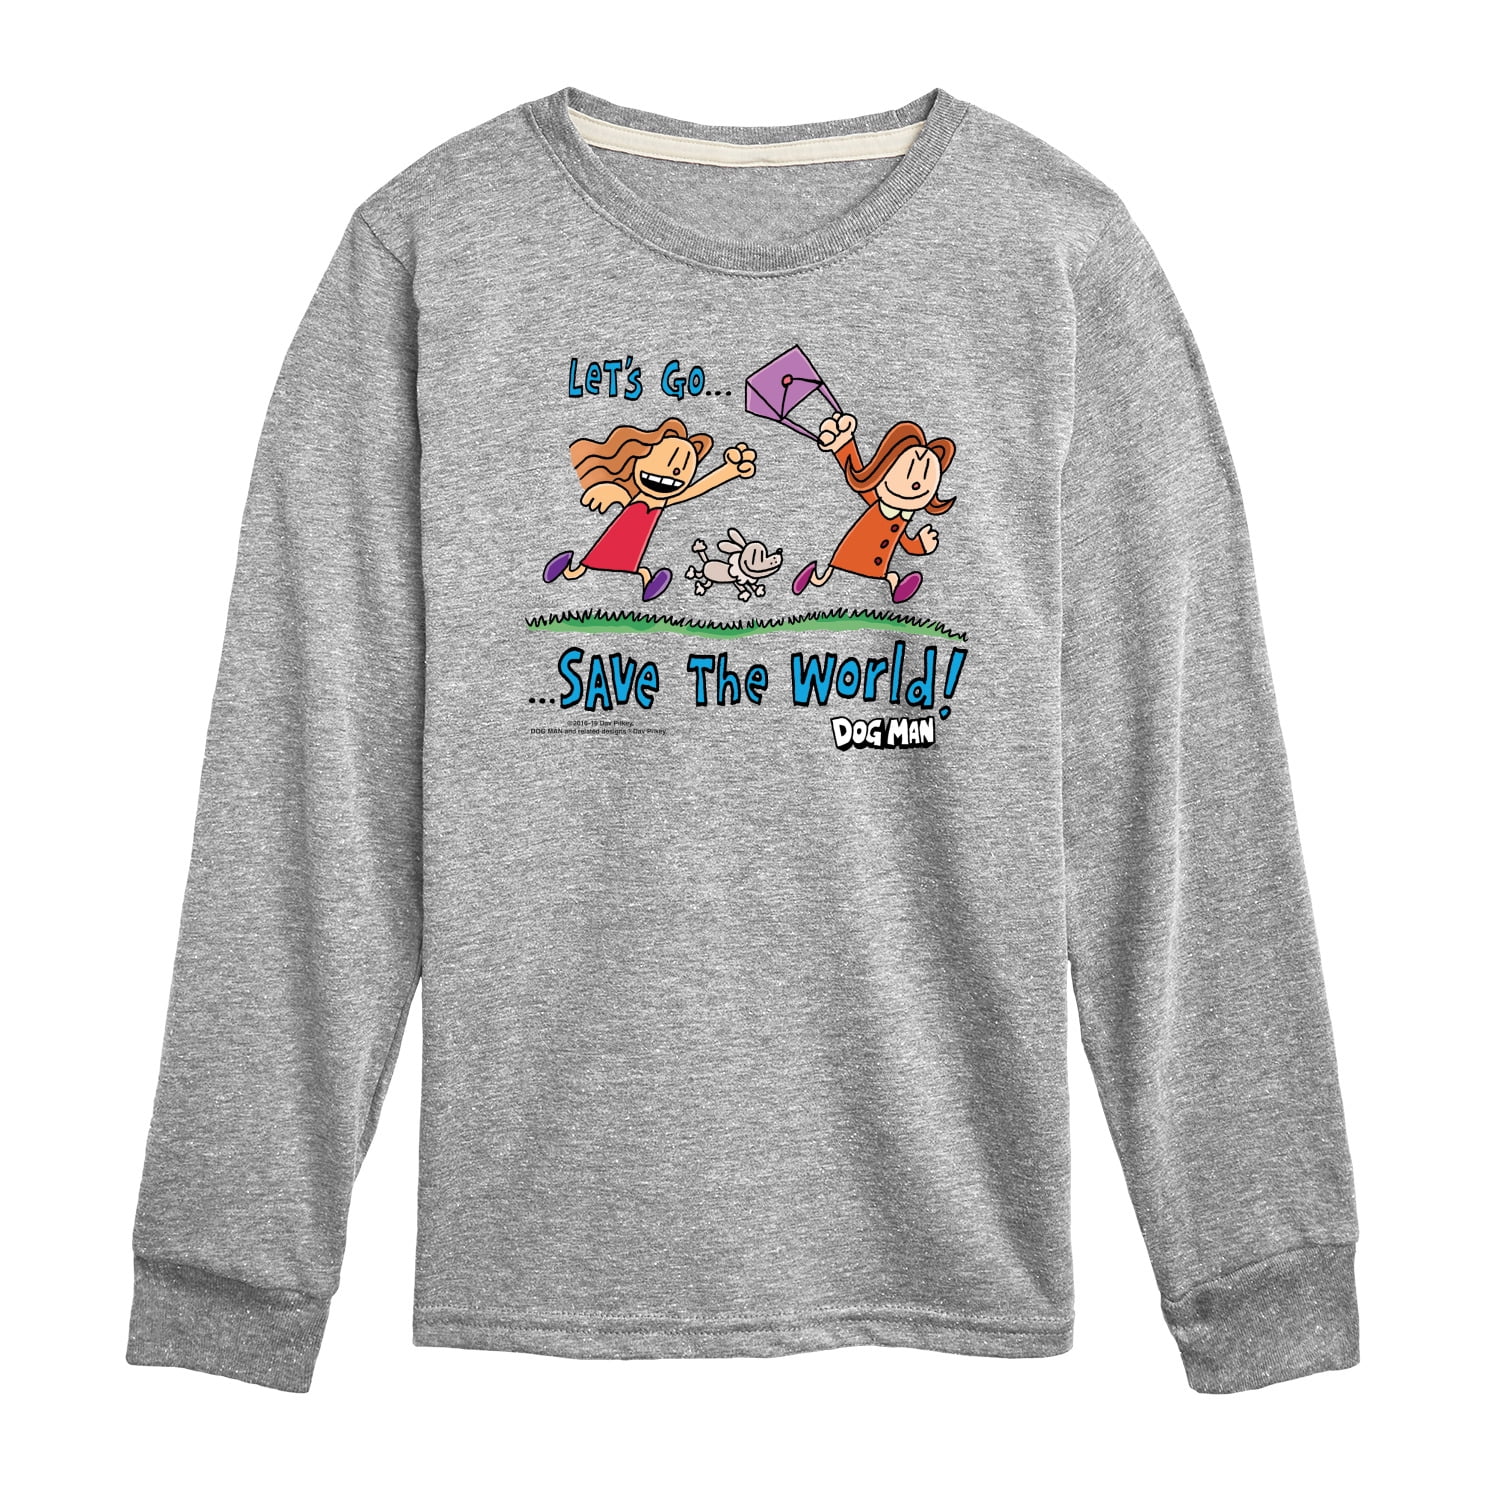 Dog Man - Let's Go - Toddler And Youth Long Graphic T- Shirt - Walmart.com